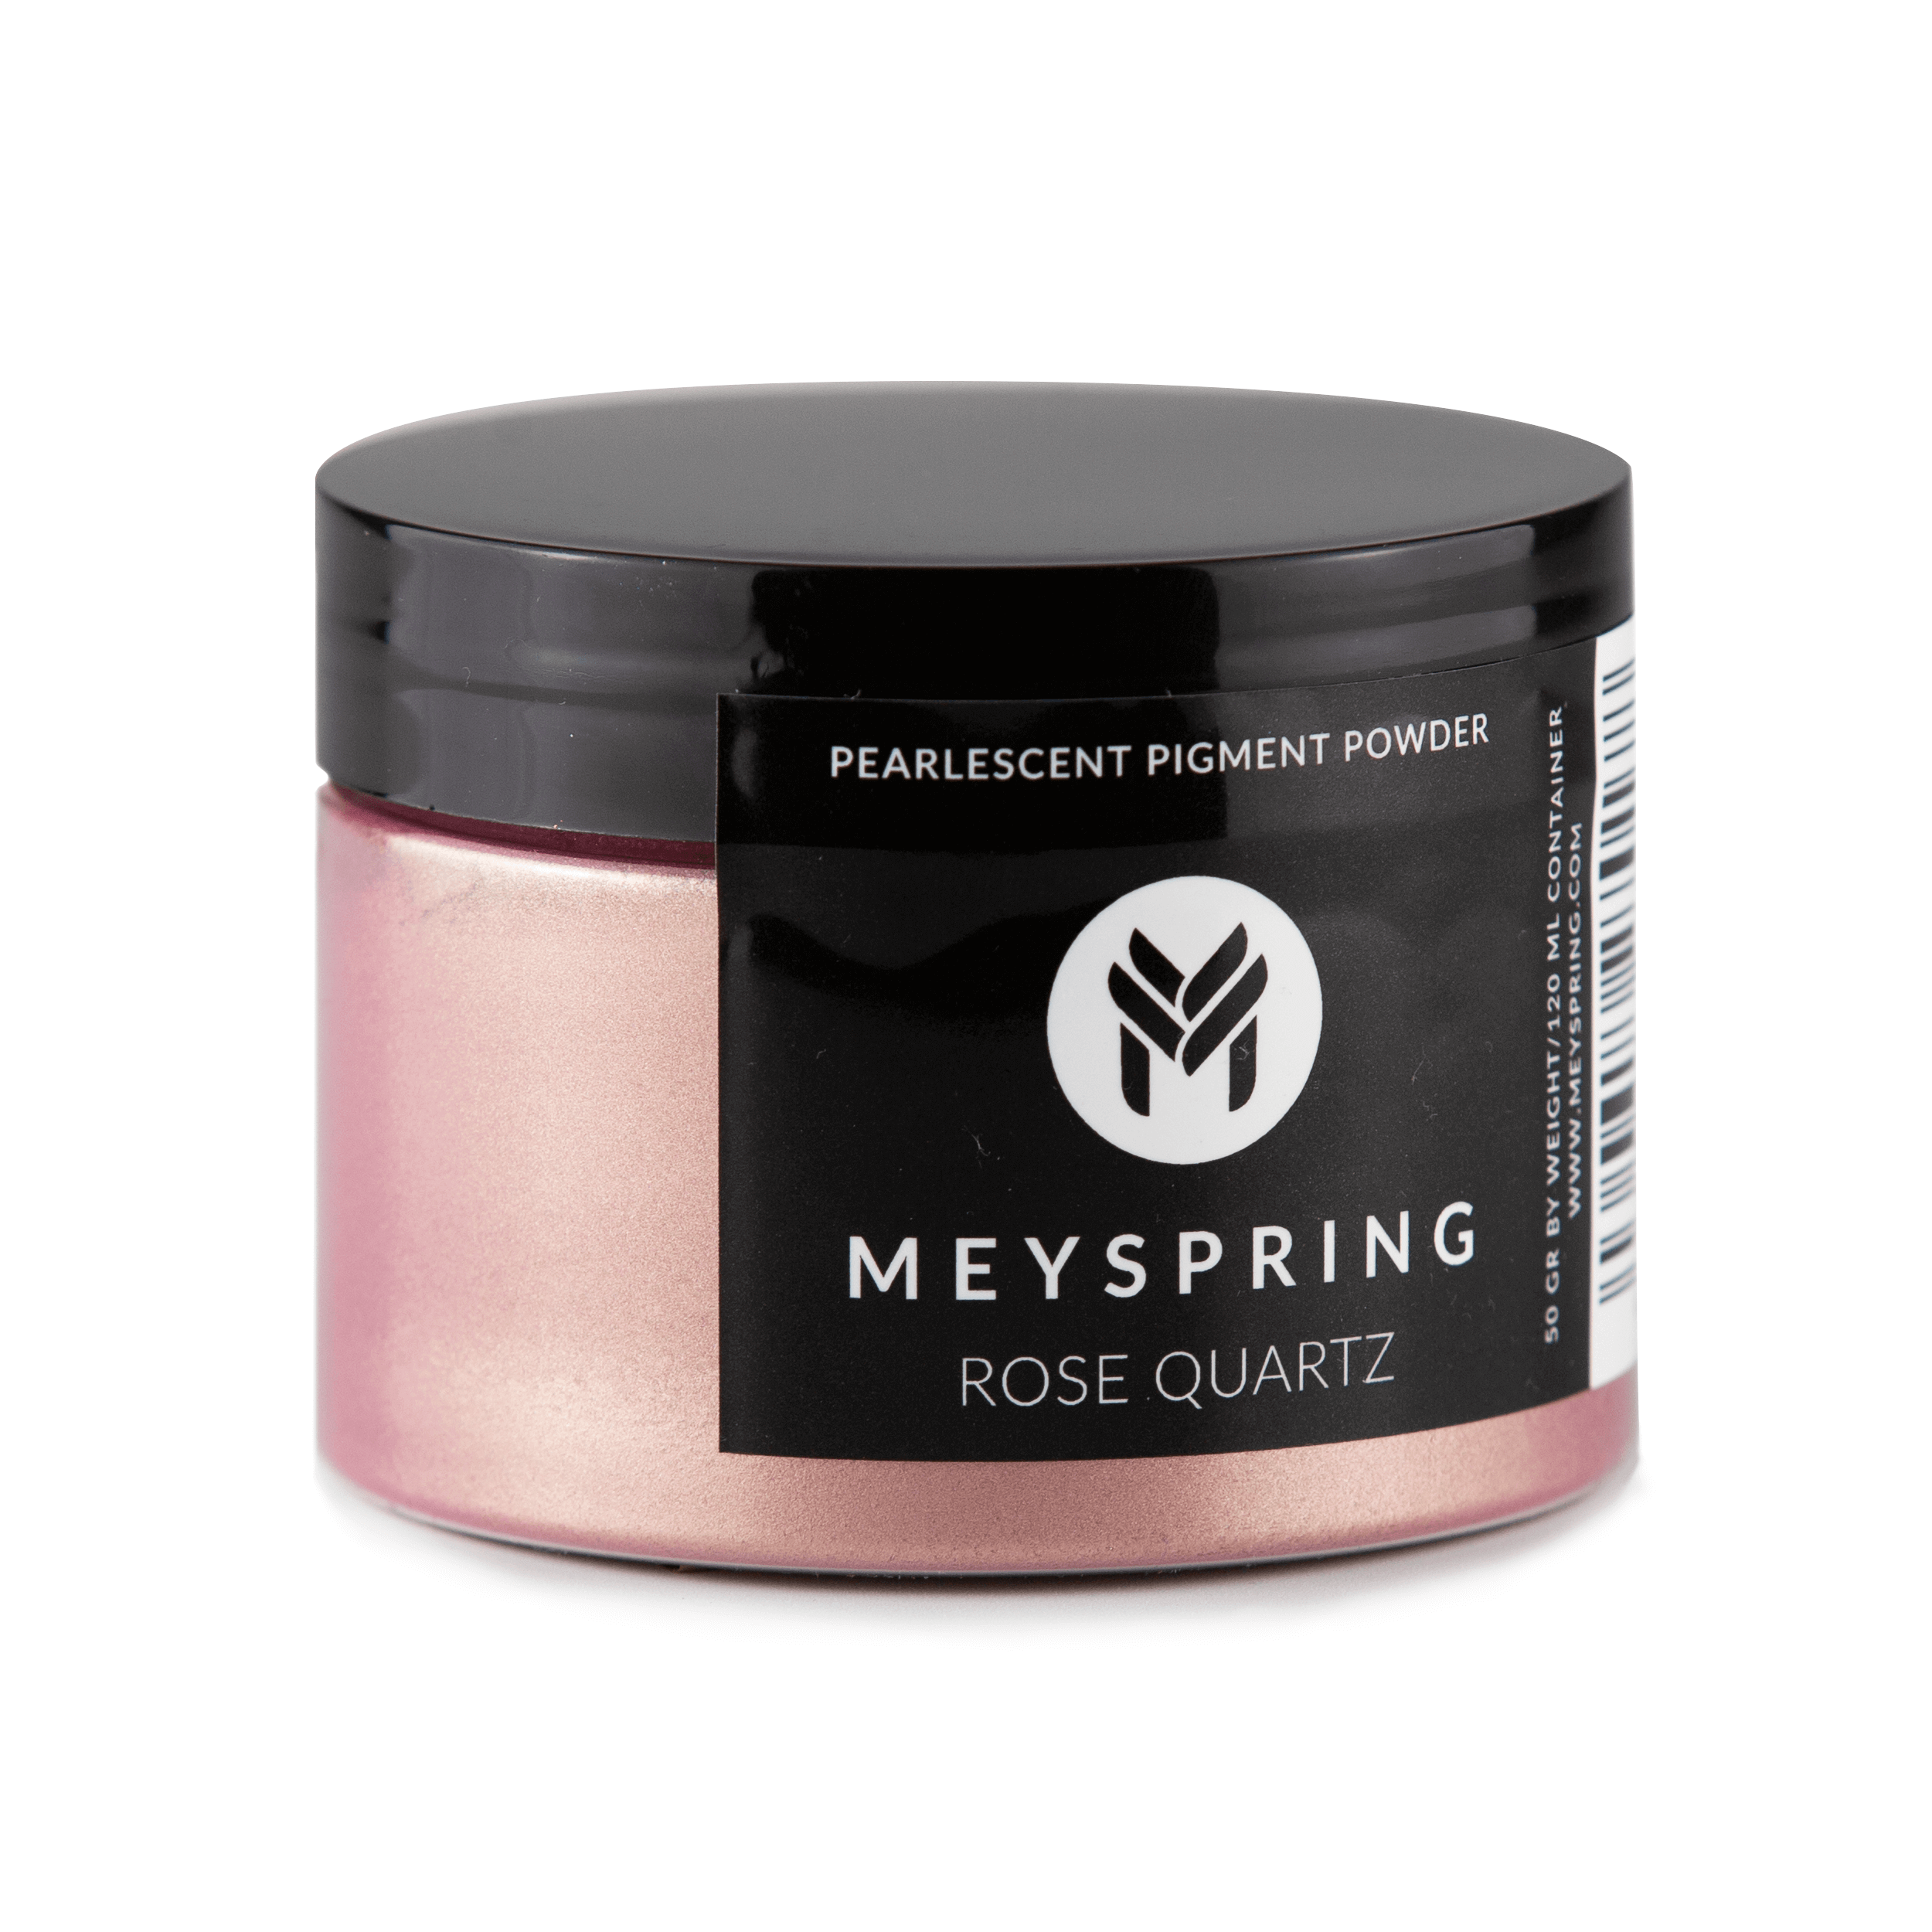  MEYSPRING Two Tone Collection - Mica Powder for Epoxy Resin -  New Generation of Epoxy Resin Color Pigment - 100% Mineral, Skin-Safe, and  Inert Pigment Powder for Epoxy Resin (Pigment Powder